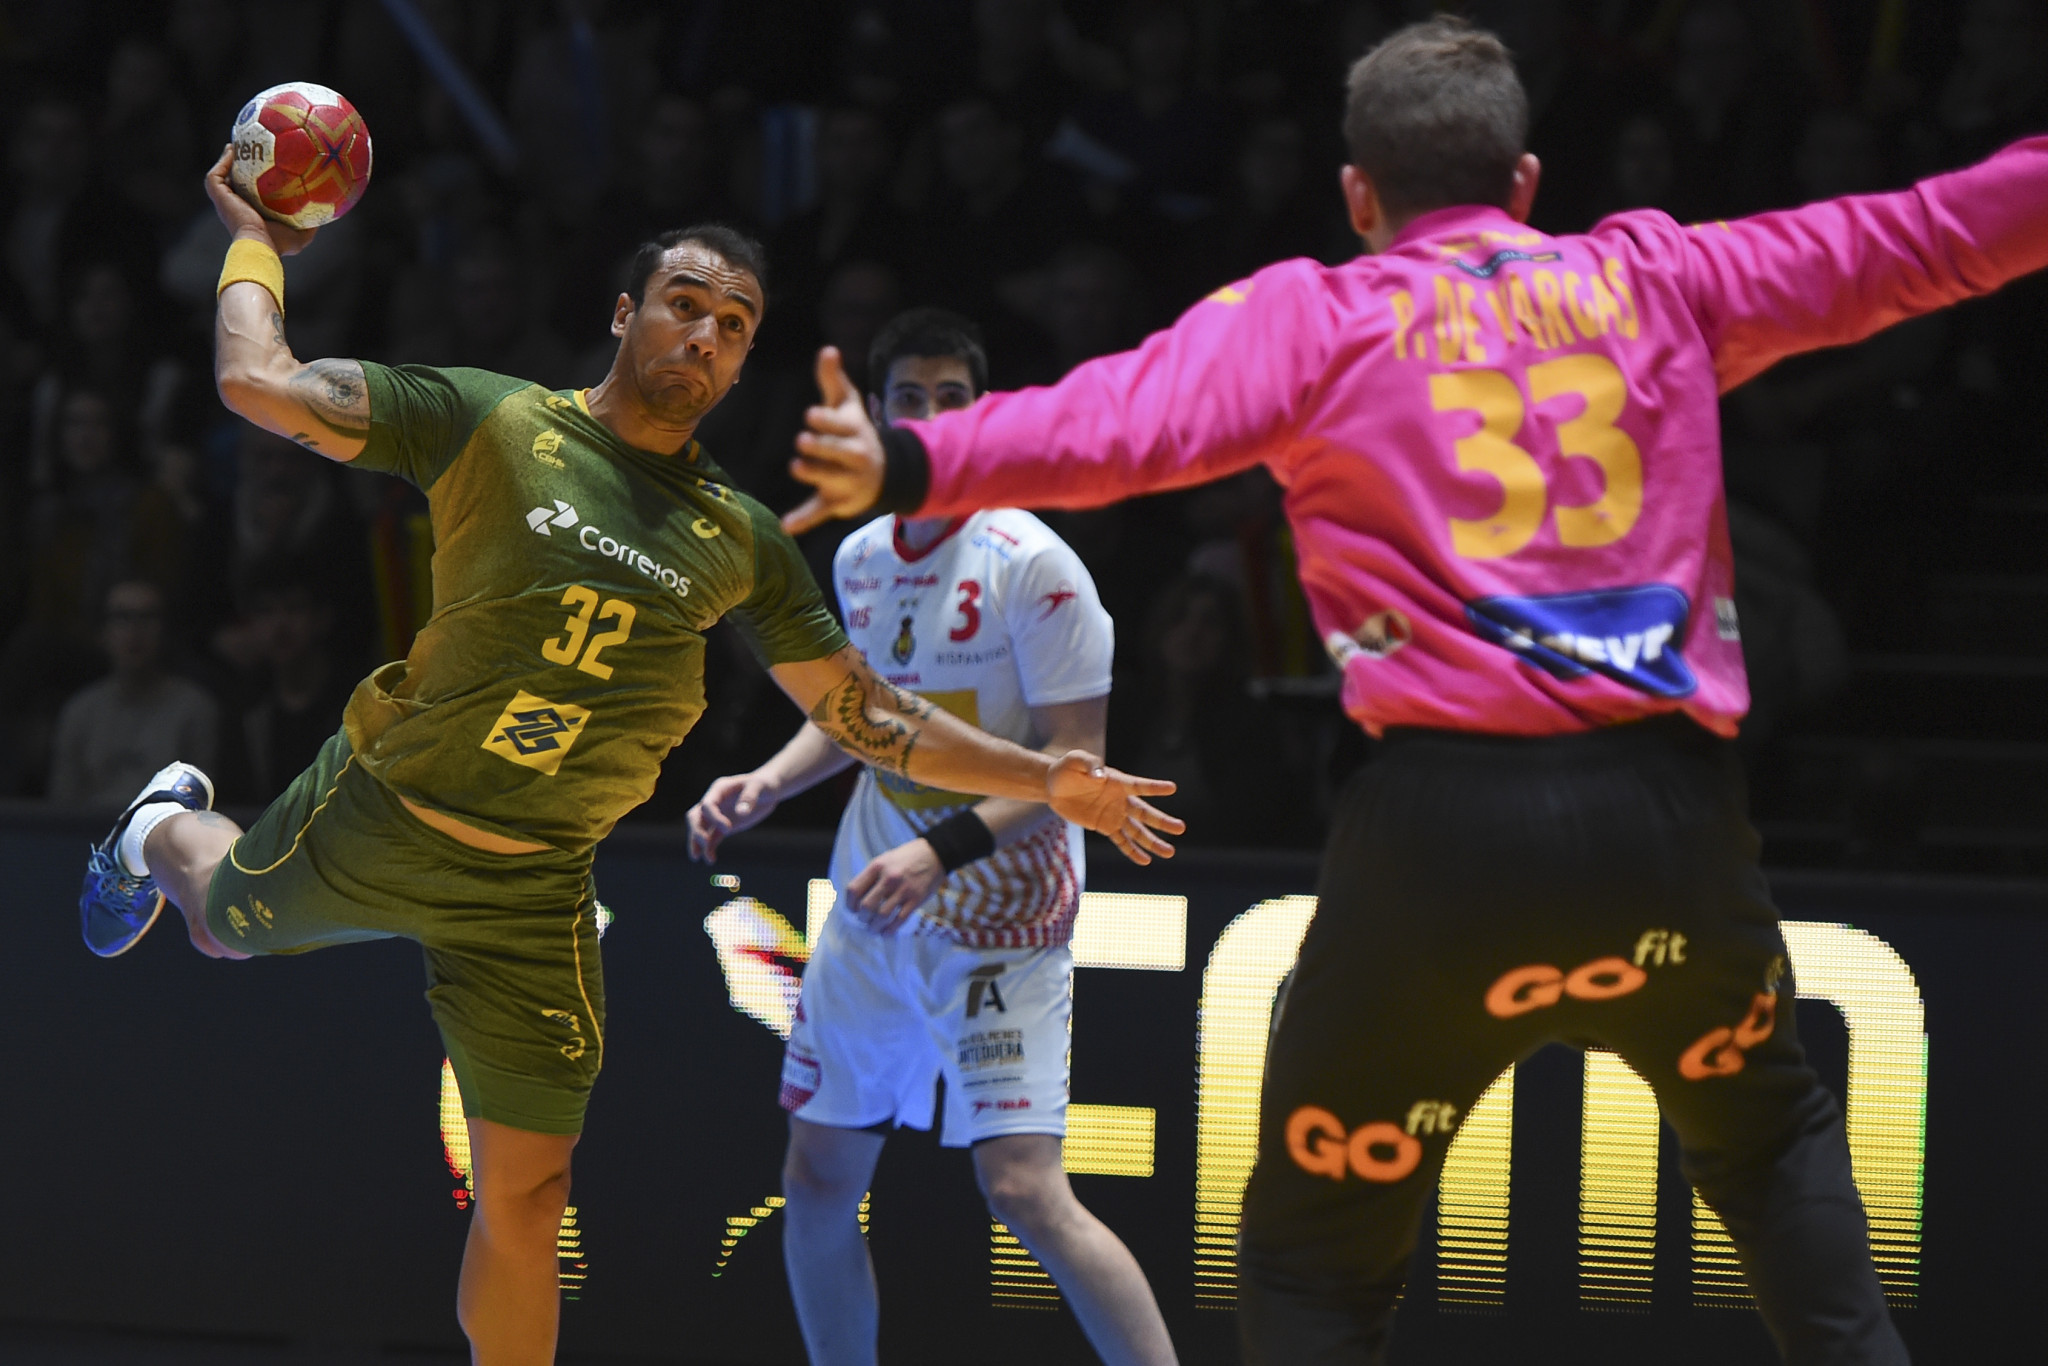 Defending champions Brazil beat Paraguay today to make it three wins out of three at the 2018 Pan American Men’s Handball Championship in Nuuk in Greenland ©Getty Images